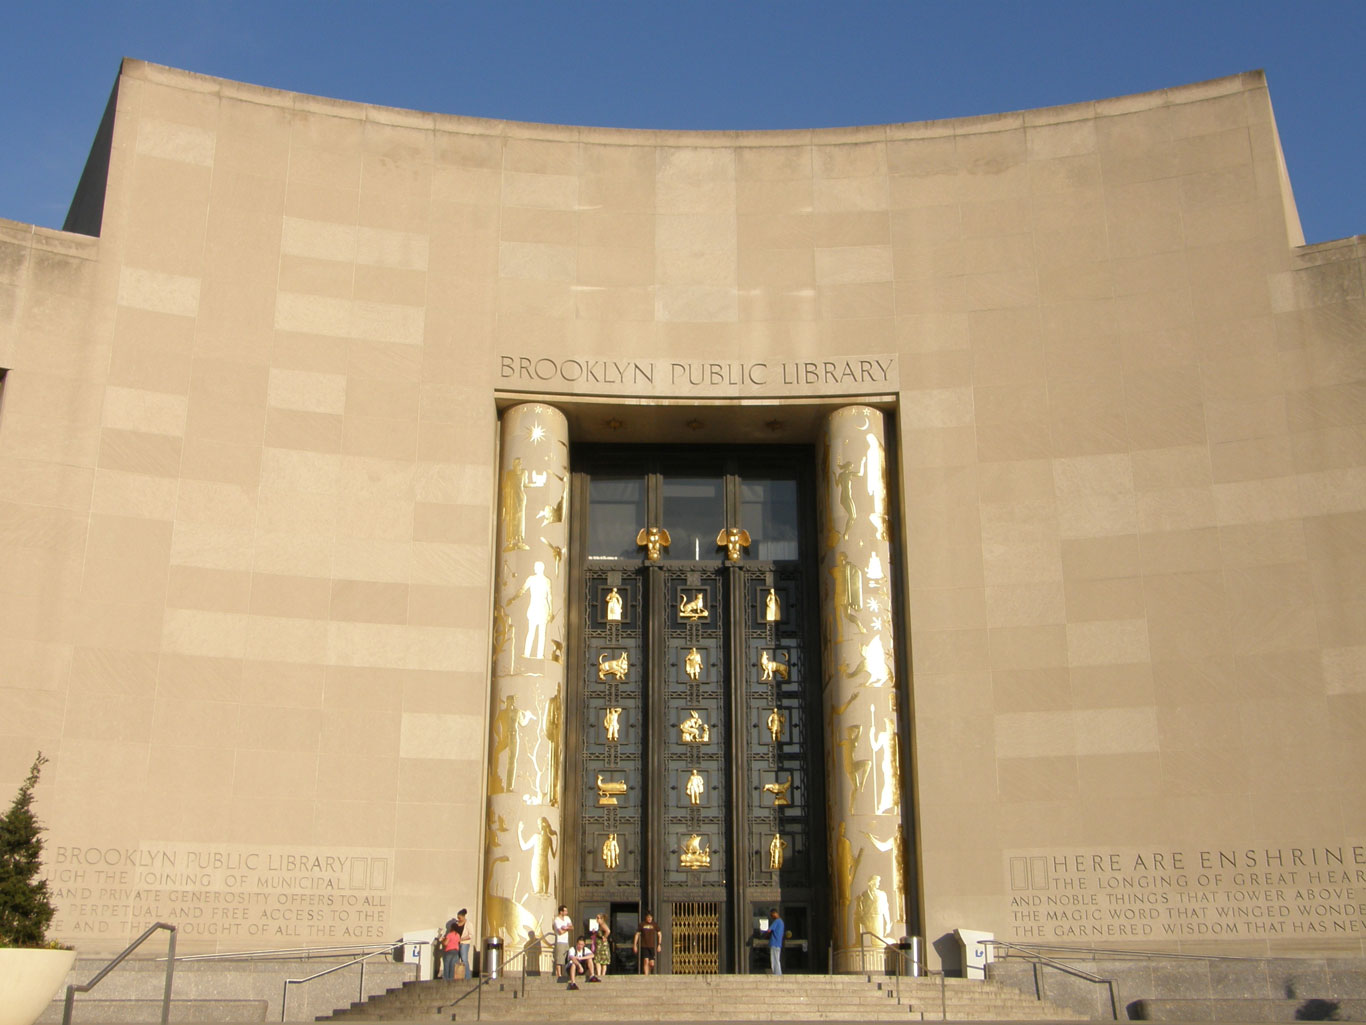 Outside of the Brooklyn public library